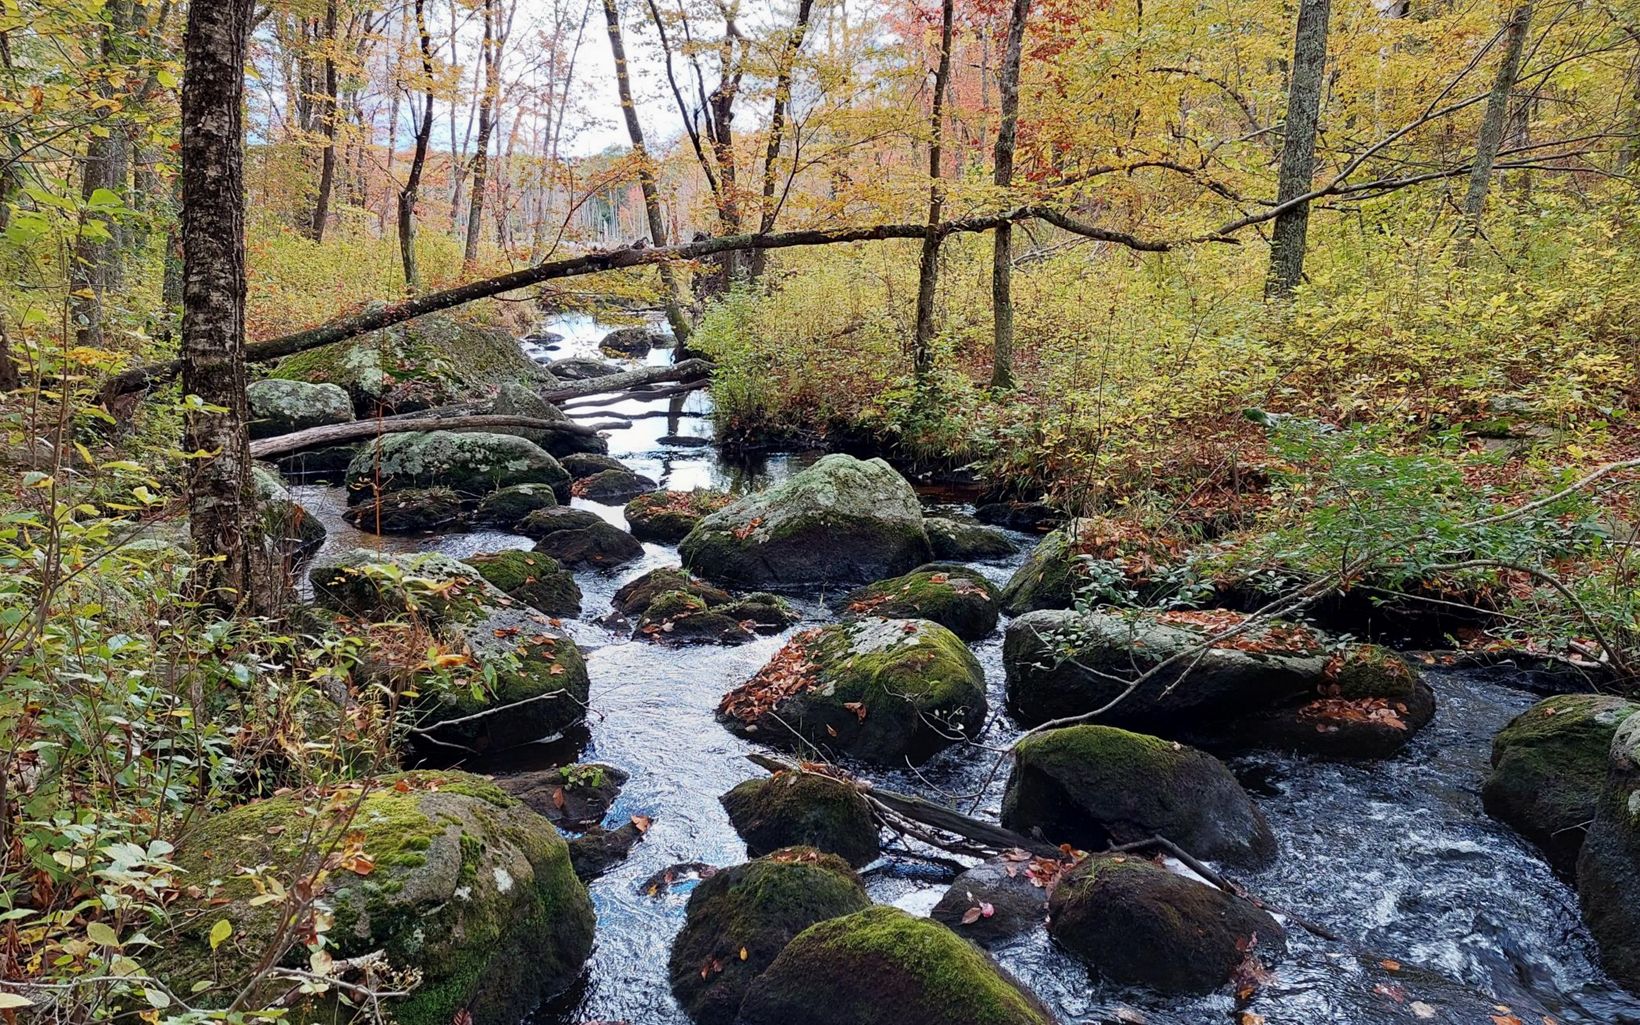 FALL COLORS The Beaver River is one of the healthiest coldwater streams in Rhode Island. © Cheryl Swinconeck/TNC